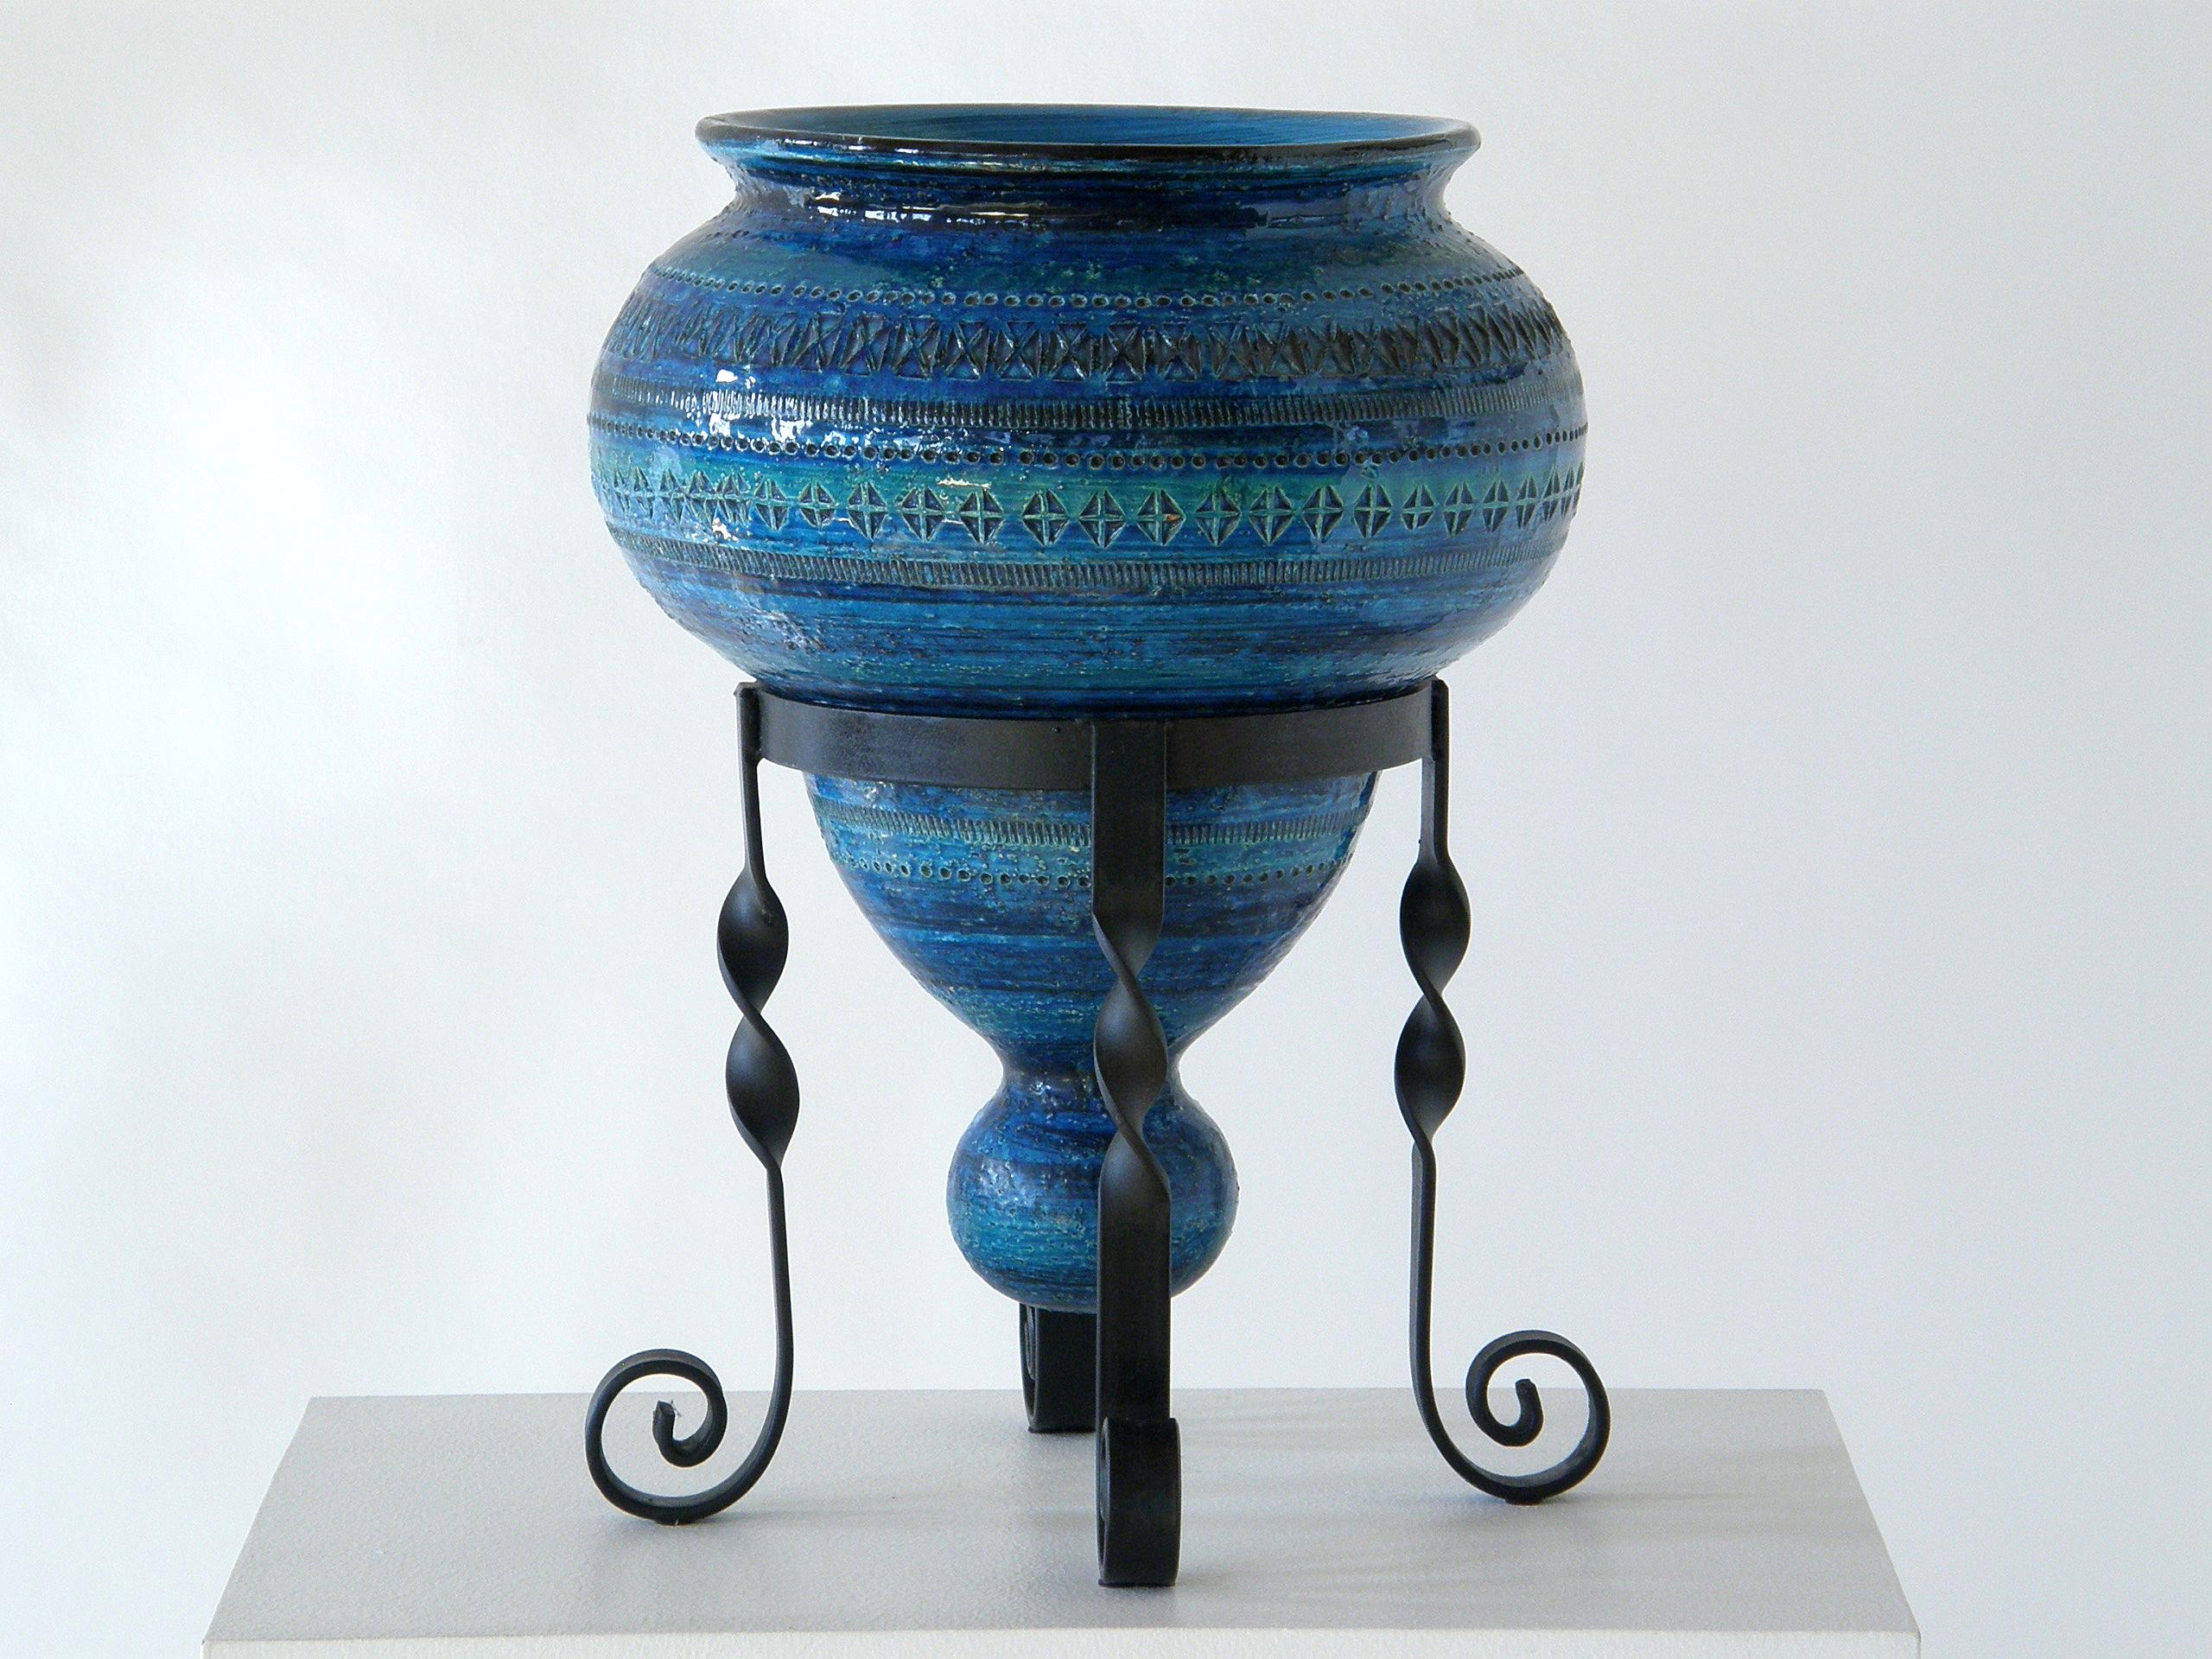 This unusual ceramic vase is attributed to Aldo Londi, from his 